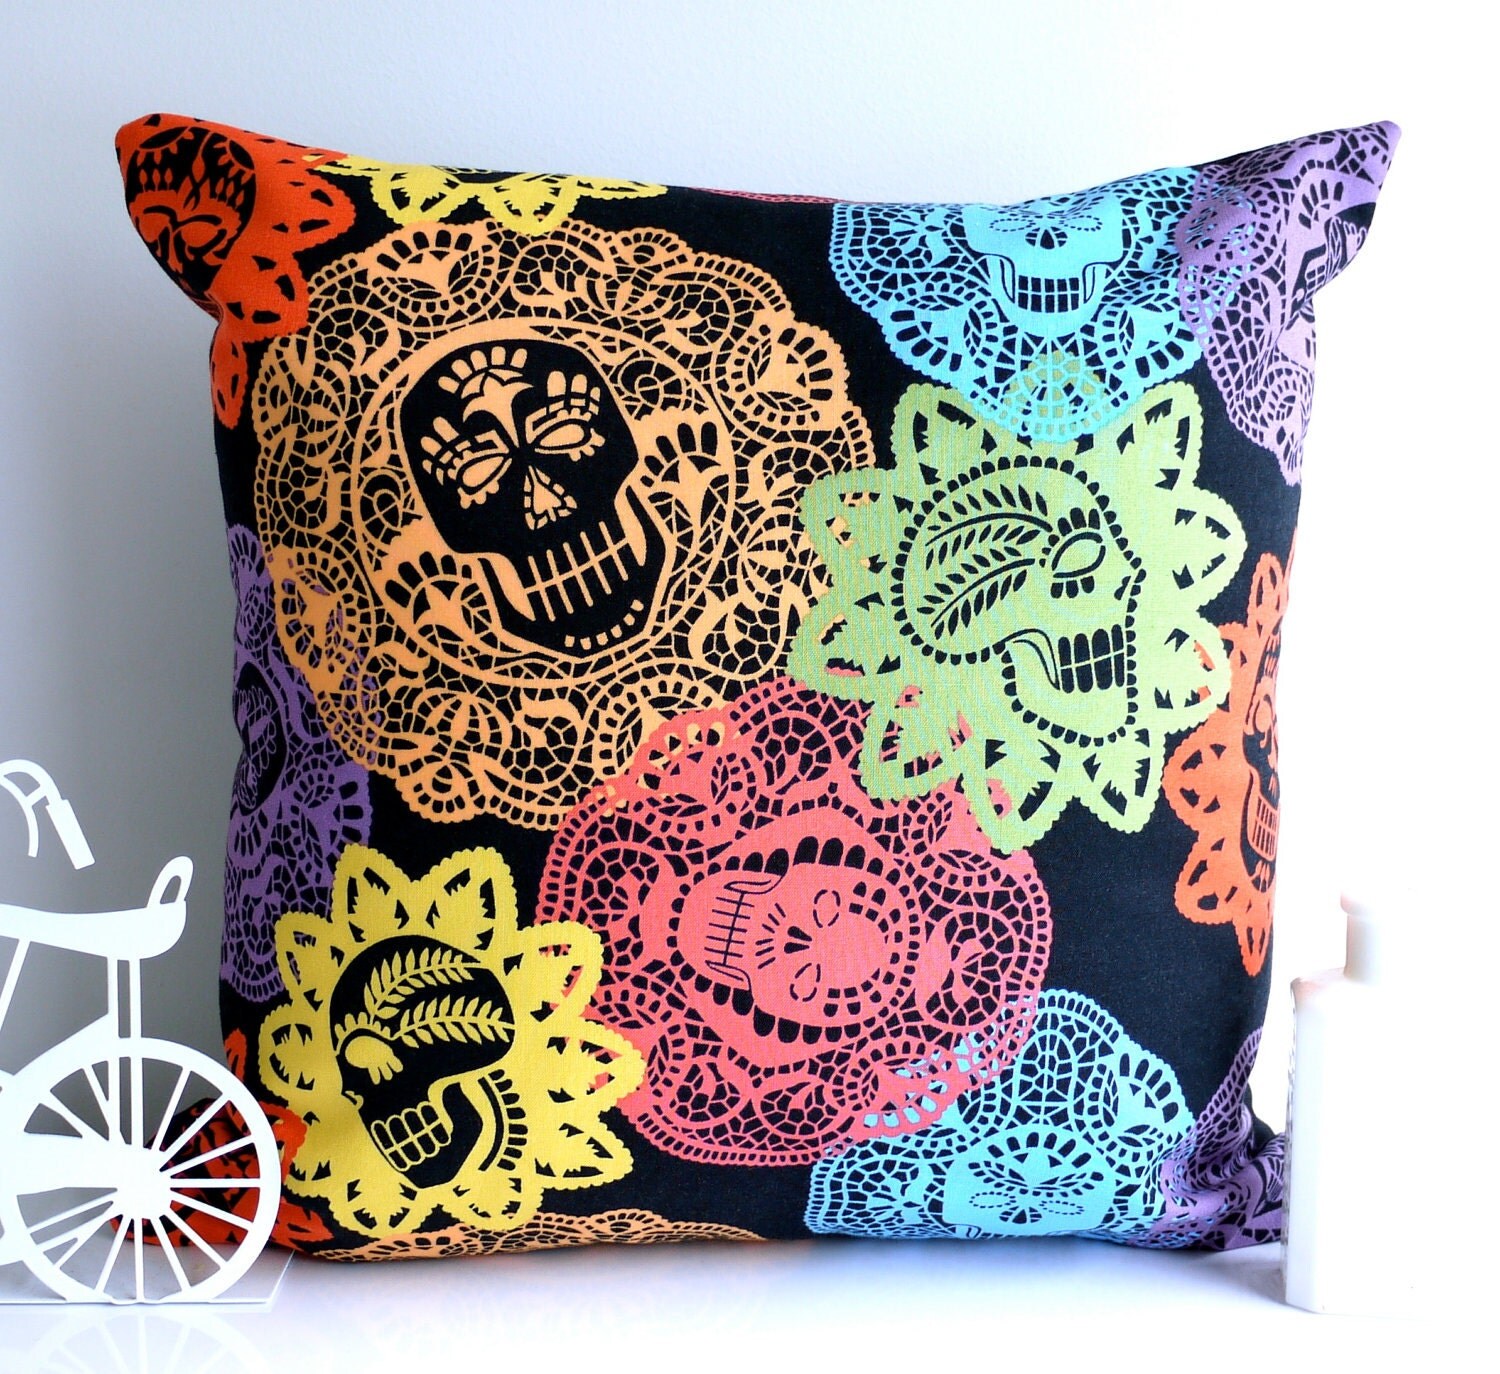 Skull cushion skull pillow colorful throw pillow retro pillow Alexander Henry papel bonito day of the dead purple pillow doily black cushion